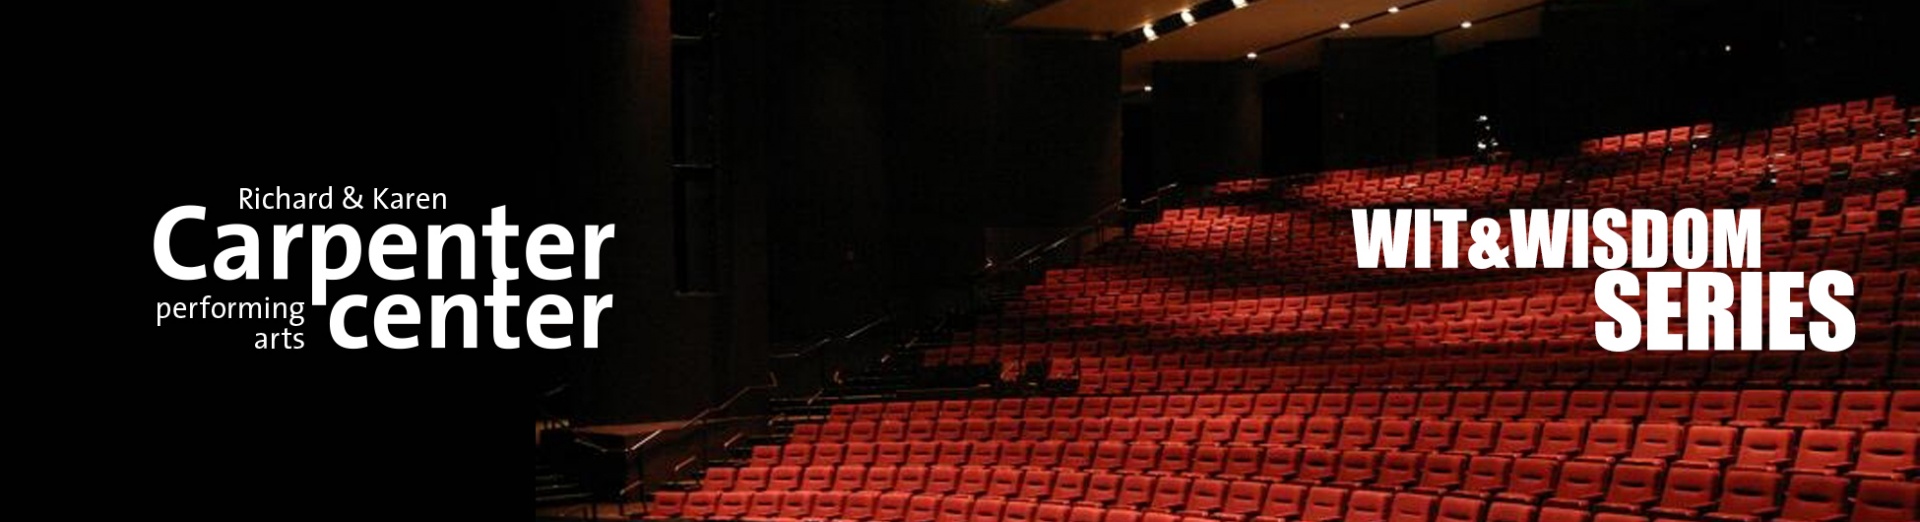 Carpenter Center logo and the words Wit and Wisdom Series on an Image of the interior of the Carpenter Center theatre